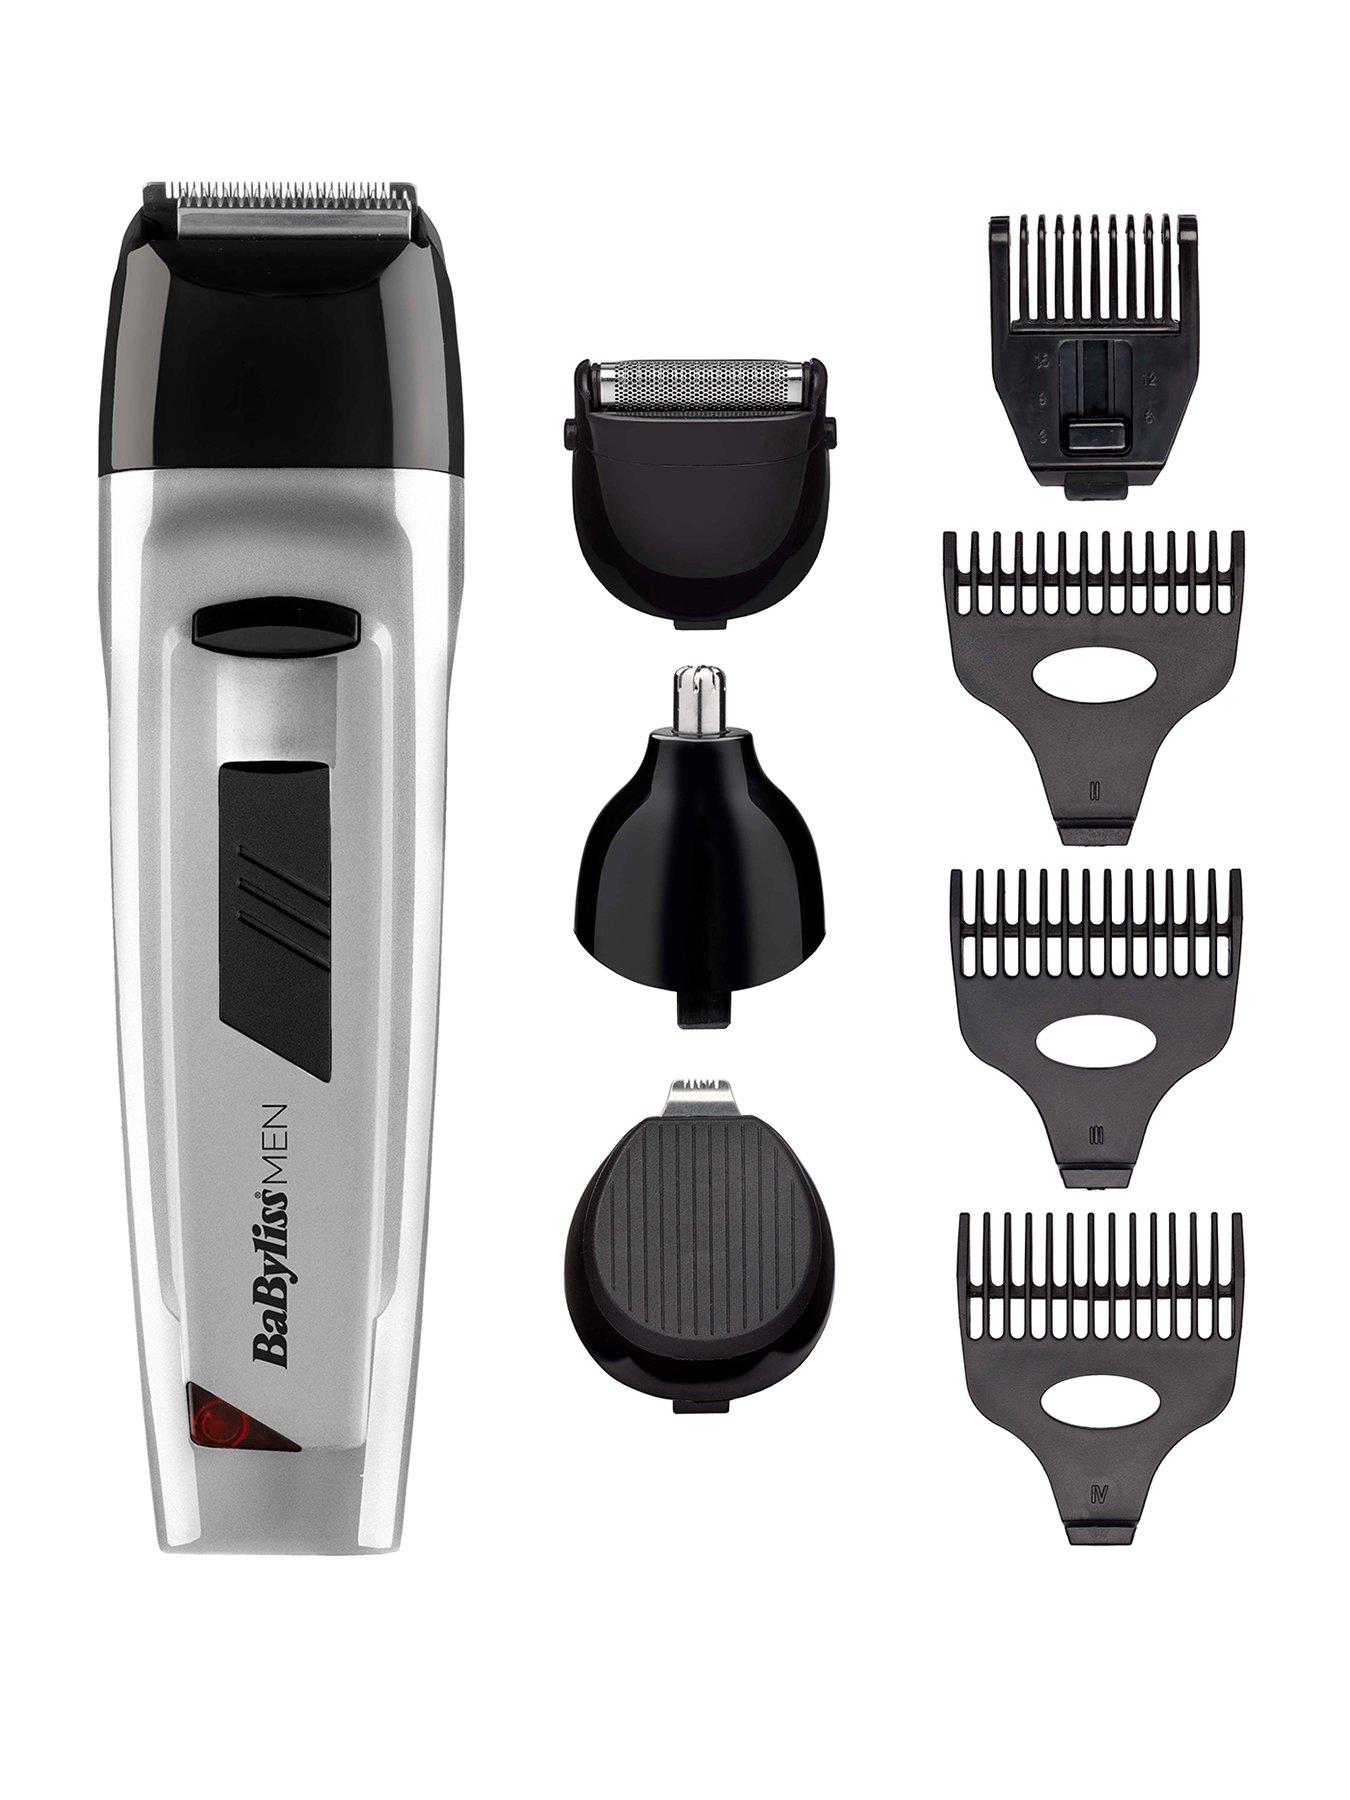 wahl max 45 clippers